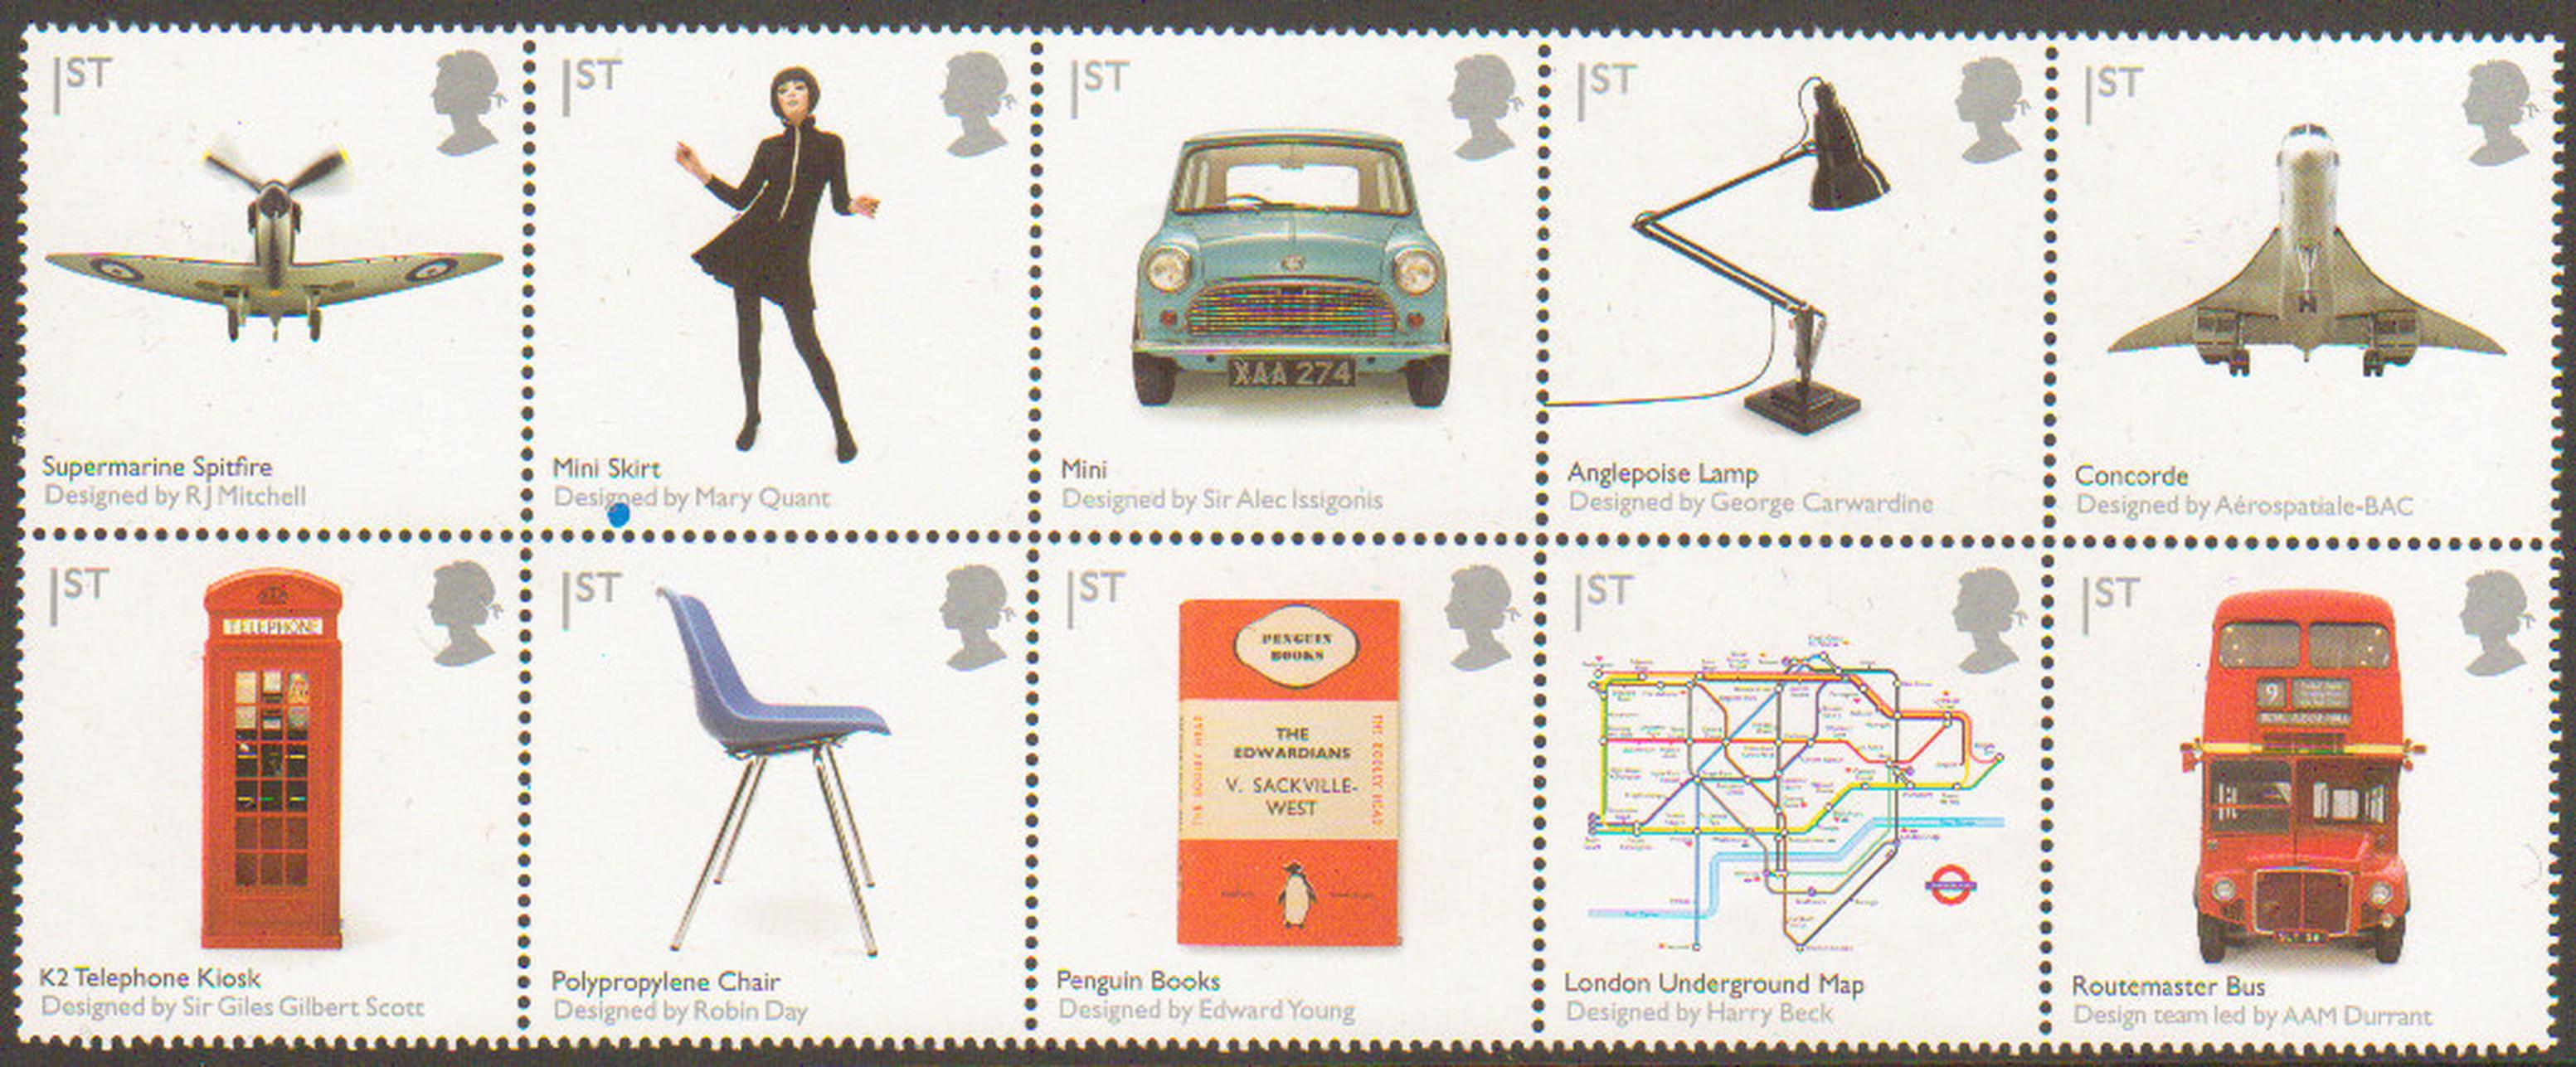 Could the electric vehicle chargepoint join the line-up the next time the Royal Mail celebrates iconic design?